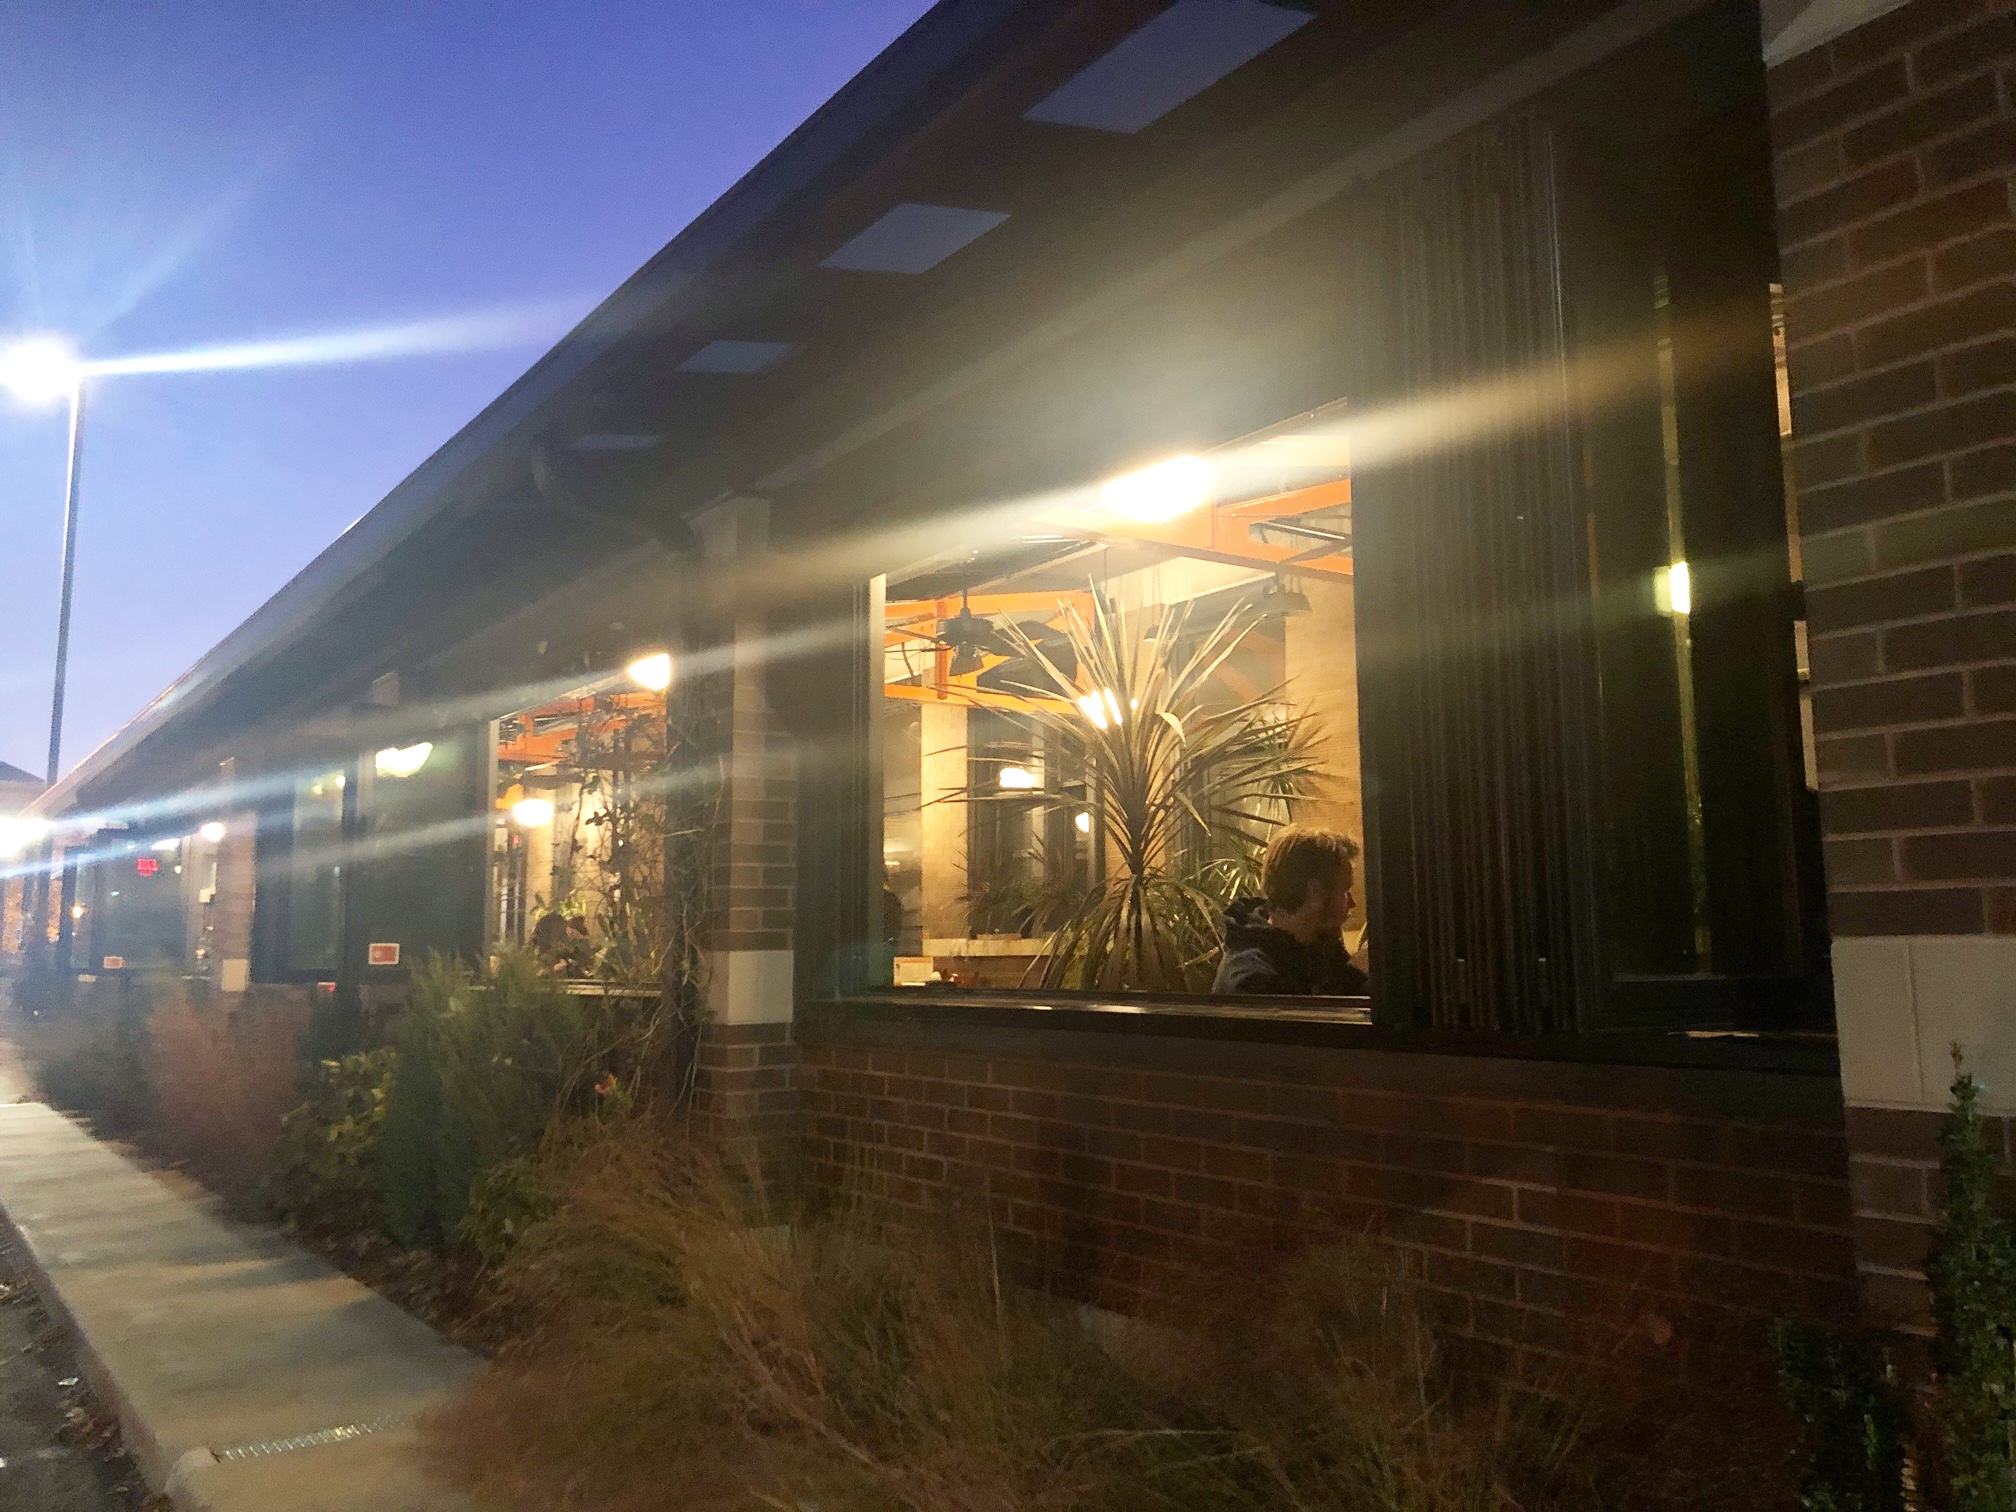 An exterior photo of Black Dog Champaign's four seasons porch. There is a male diner at one of the tables inside with the windows open on a dark night. Photo by Alyssa Buckley.